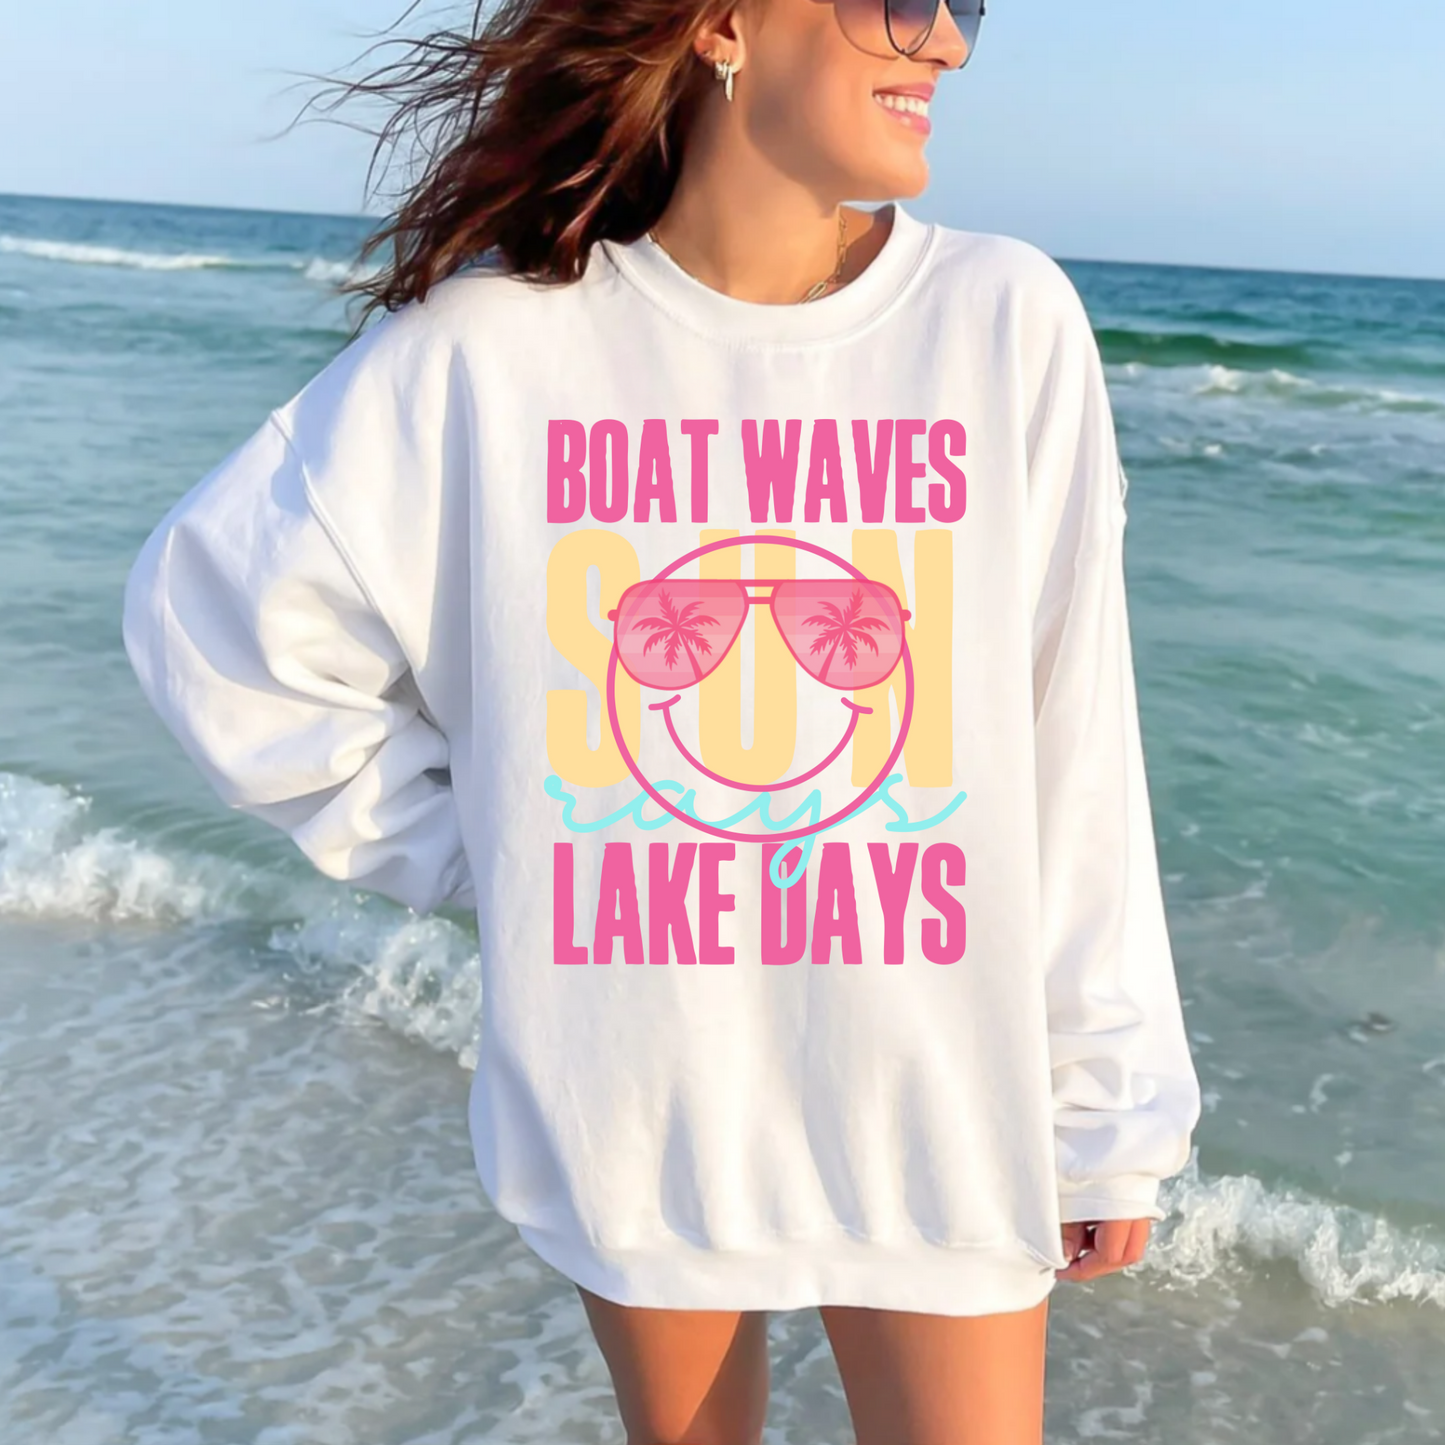 (Shirt not included) Boat Waves Lake Days -  Clear Film Transfer